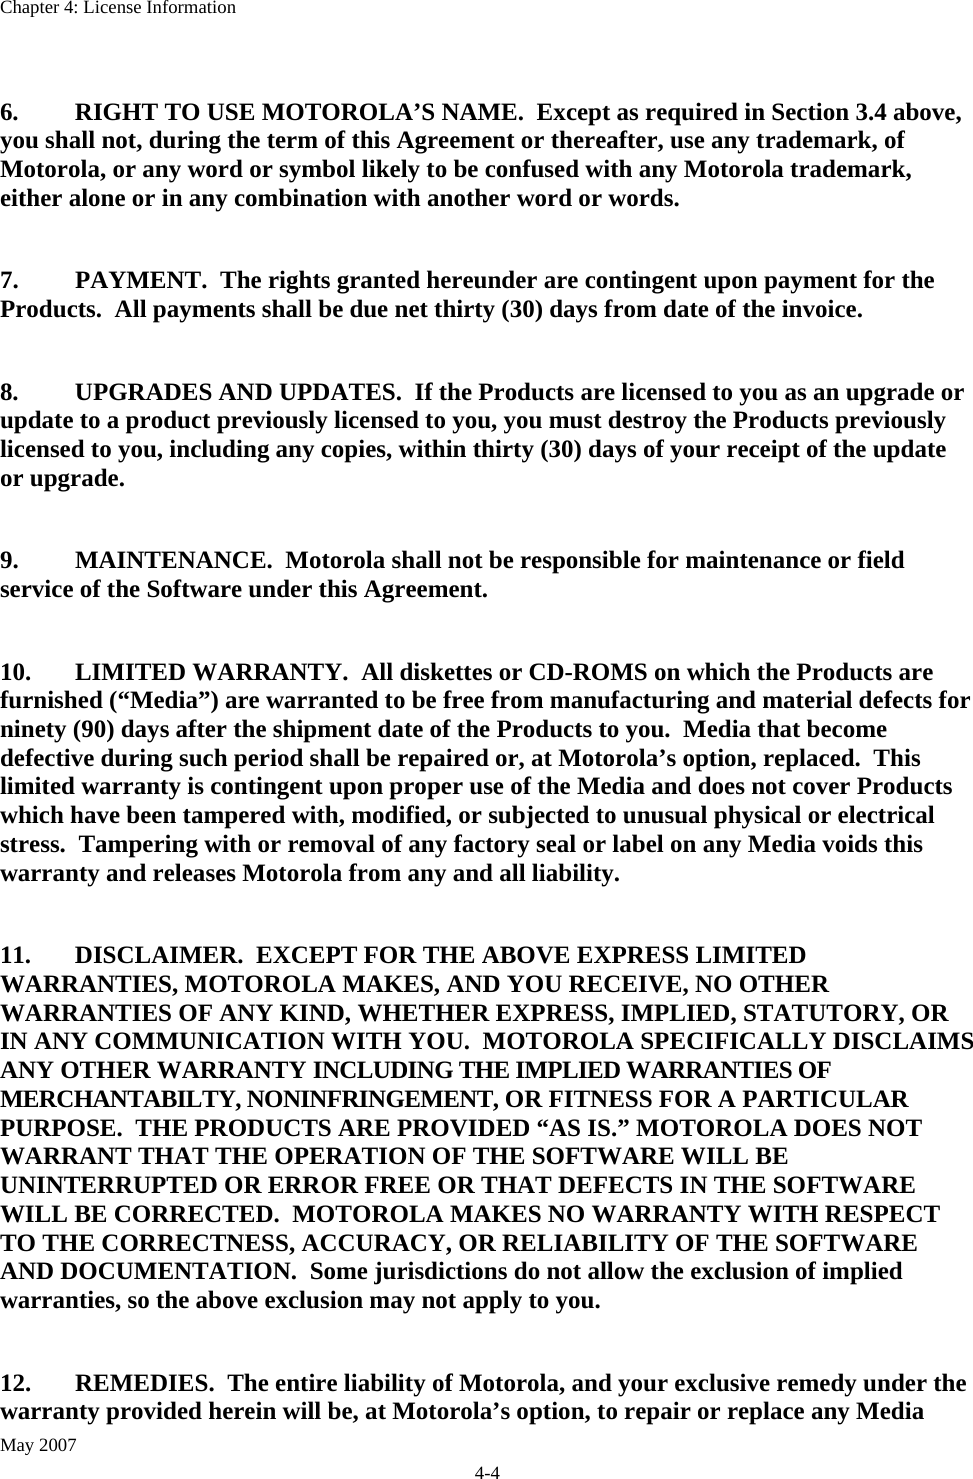 Chapter 4: License Information May 2007 4-4  6.  RIGHT TO USE MOTOROLA’S NAME.  Except as required in Section 3.4 above, you shall not, during the term of this Agreement or thereafter, use any trademark, of Motorola, or any word or symbol likely to be confused with any Motorola trademark, either alone or in any combination with another word or words.  7.  PAYMENT.  The rights granted hereunder are contingent upon payment for the Products.  All payments shall be due net thirty (30) days from date of the invoice.  8.  UPGRADES AND UPDATES.  If the Products are licensed to you as an upgrade or update to a product previously licensed to you, you must destroy the Products previously licensed to you, including any copies, within thirty (30) days of your receipt of the update or upgrade.  9.  MAINTENANCE.  Motorola shall not be responsible for maintenance or field service of the Software under this Agreement.  10.  LIMITED WARRANTY.  All diskettes or CD-ROMS on which the Products are furnished (“Media”) are warranted to be free from manufacturing and material defects for ninety (90) days after the shipment date of the Products to you.  Media that become defective during such period shall be repaired or, at Motorola’s option, replaced.  This limited warranty is contingent upon proper use of the Media and does not cover Products which have been tampered with, modified, or subjected to unusual physical or electrical stress.  Tampering with or removal of any factory seal or label on any Media voids this warranty and releases Motorola from any and all liability.  11.  DISCLAIMER.  EXCEPT FOR THE ABOVE EXPRESS LIMITED WARRANTIES, MOTOROLA MAKES, AND YOU RECEIVE, NO OTHER WARRANTIES OF ANY KIND, WHETHER EXPRESS, IMPLIED, STATUTORY, OR IN ANY COMMUNICATION WITH YOU.  MOTOROLA SPECIFICALLY DISCLAIMS ANY OTHER WARRANTY INCLUDING THE IMPLIED WARRANTIES OF MERCHANTABILTY, NONINFRINGEMENT, OR FITNESS FOR A PARTICULAR PURPOSE.  THE PRODUCTS ARE PROVIDED “AS IS.” MOTOROLA DOES NOT WARRANT THAT THE OPERATION OF THE SOFTWARE WILL BE UNINTERRUPTED OR ERROR FREE OR THAT DEFECTS IN THE SOFTWARE WILL BE CORRECTED.  MOTOROLA MAKES NO WARRANTY WITH RESPECT TO THE CORRECTNESS, ACCURACY, OR RELIABILITY OF THE SOFTWARE AND DOCUMENTATION.  Some jurisdictions do not allow the exclusion of implied warranties, so the above exclusion may not apply to you.   12.  REMEDIES.  The entire liability of Motorola, and your exclusive remedy under the warranty provided herein will be, at Motorola’s option, to repair or replace any Media 